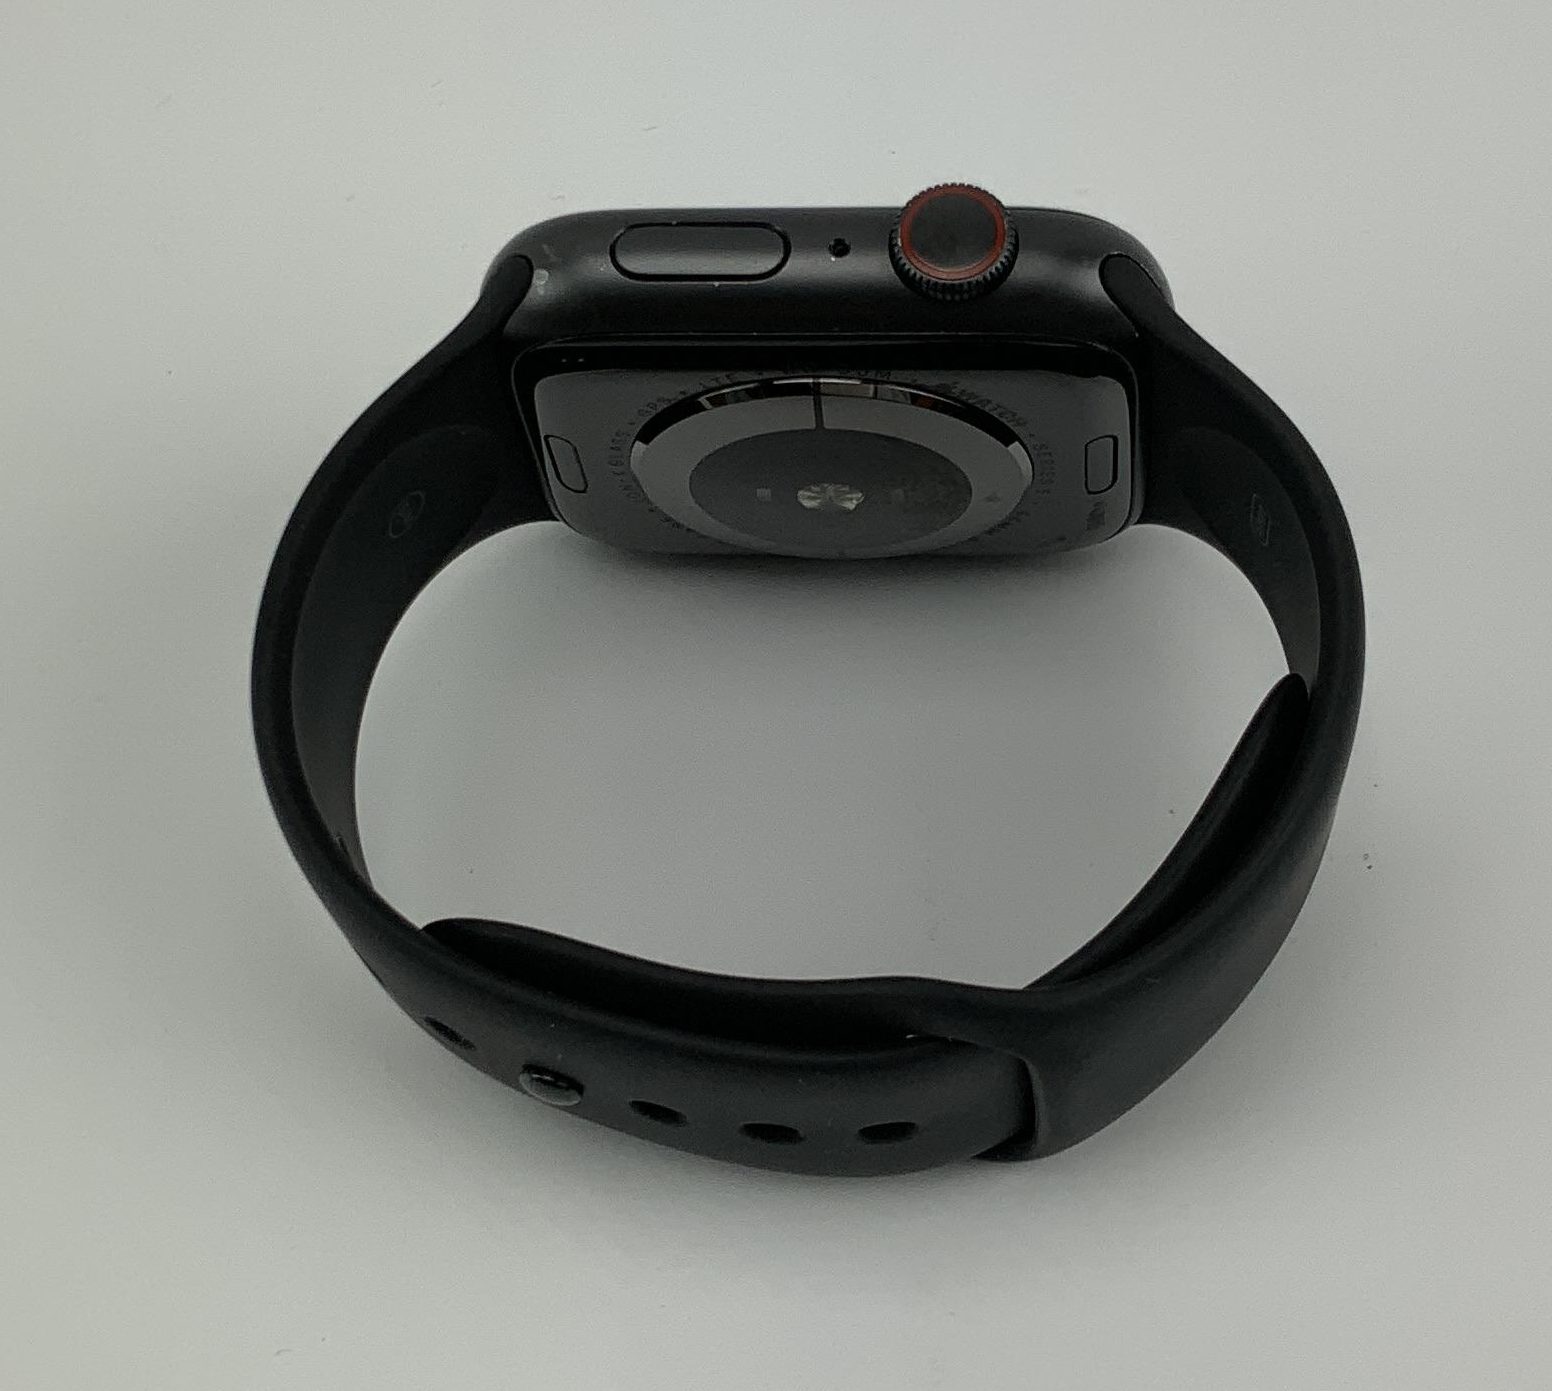 Watch Series 5 Aluminum Cellular (44mm), Space Gray, image 5